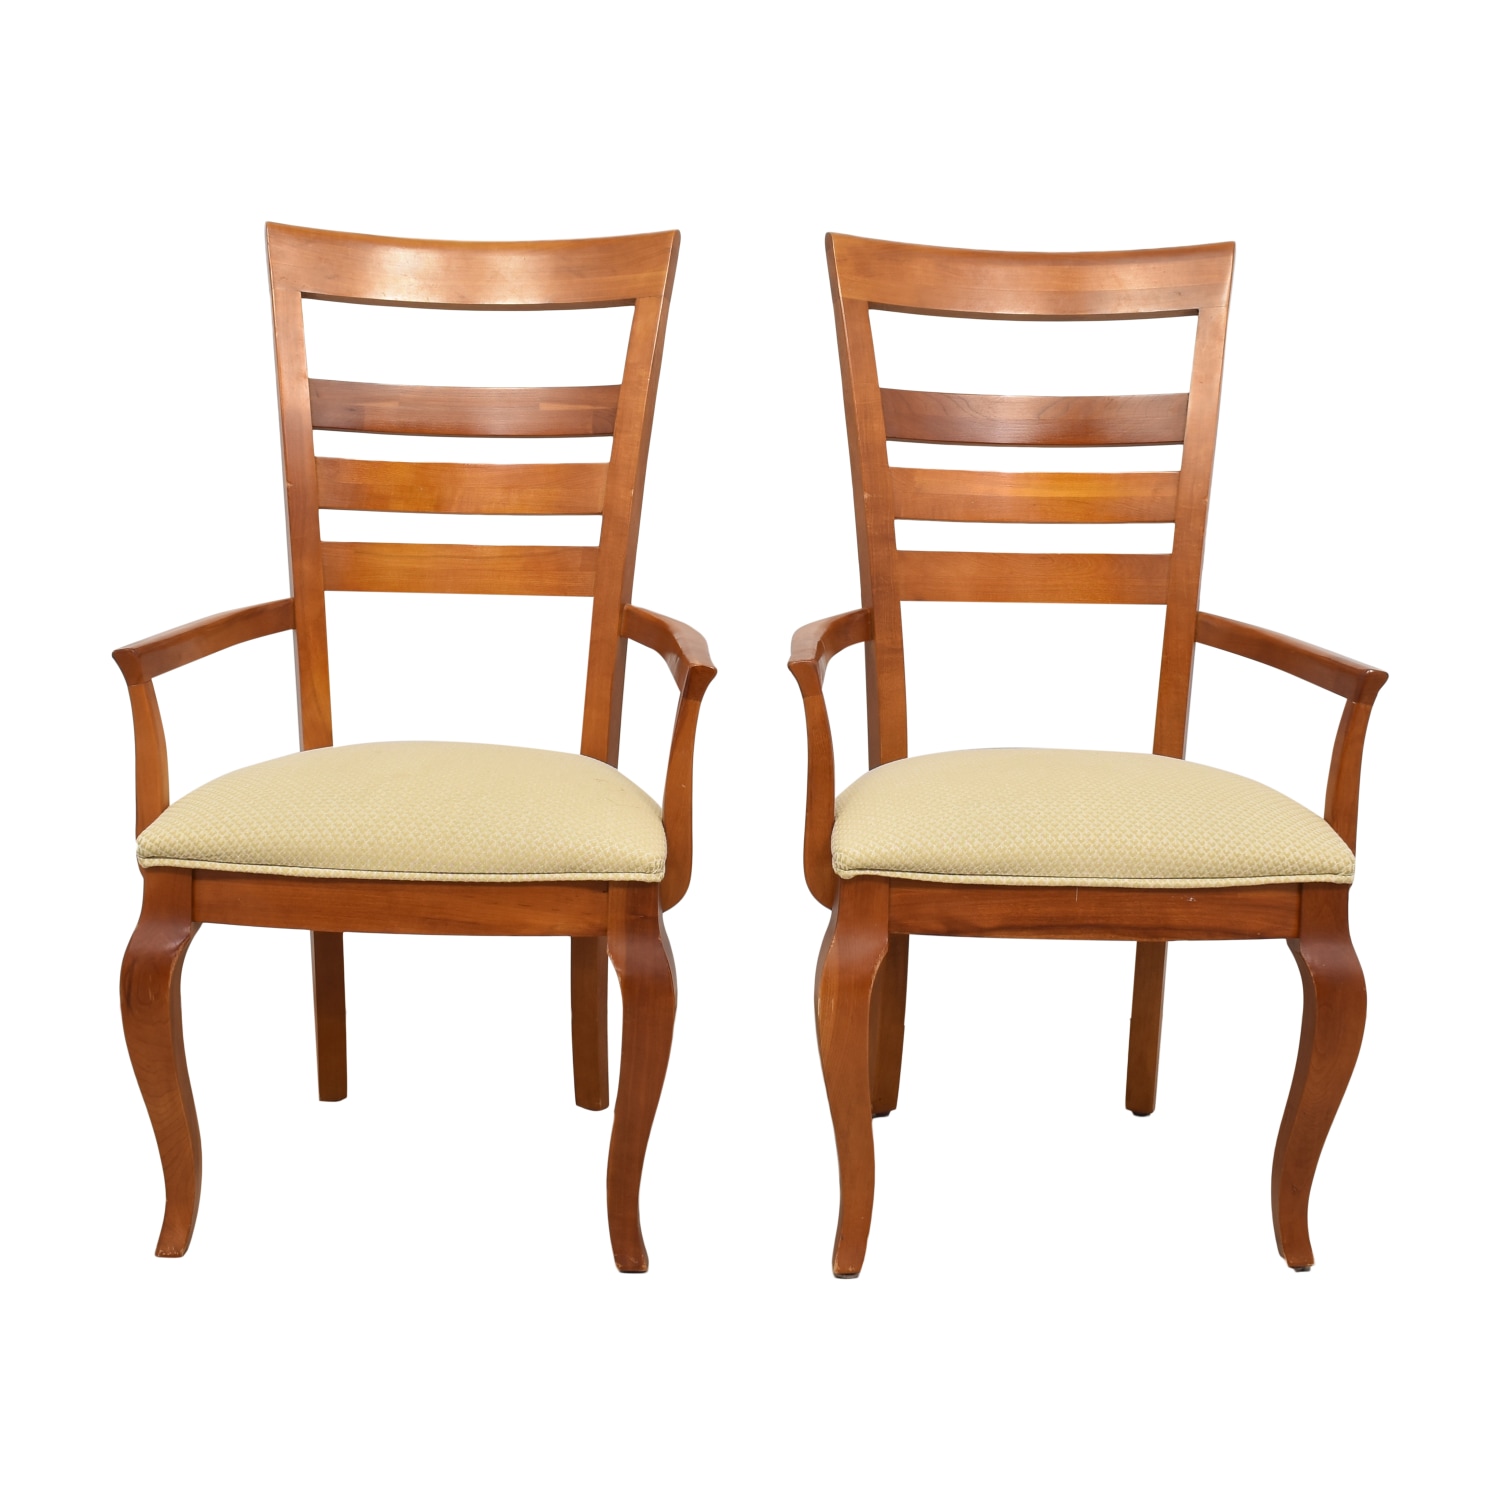 https://res.cloudinary.com/dkqtxtobb/image/upload/f_auto,q_auto:best,w_1500/product-assets/325071/stanley-furniture/chairs/dining-chairs/stanley-furniture-slat-back-dining-chairs.jpeg